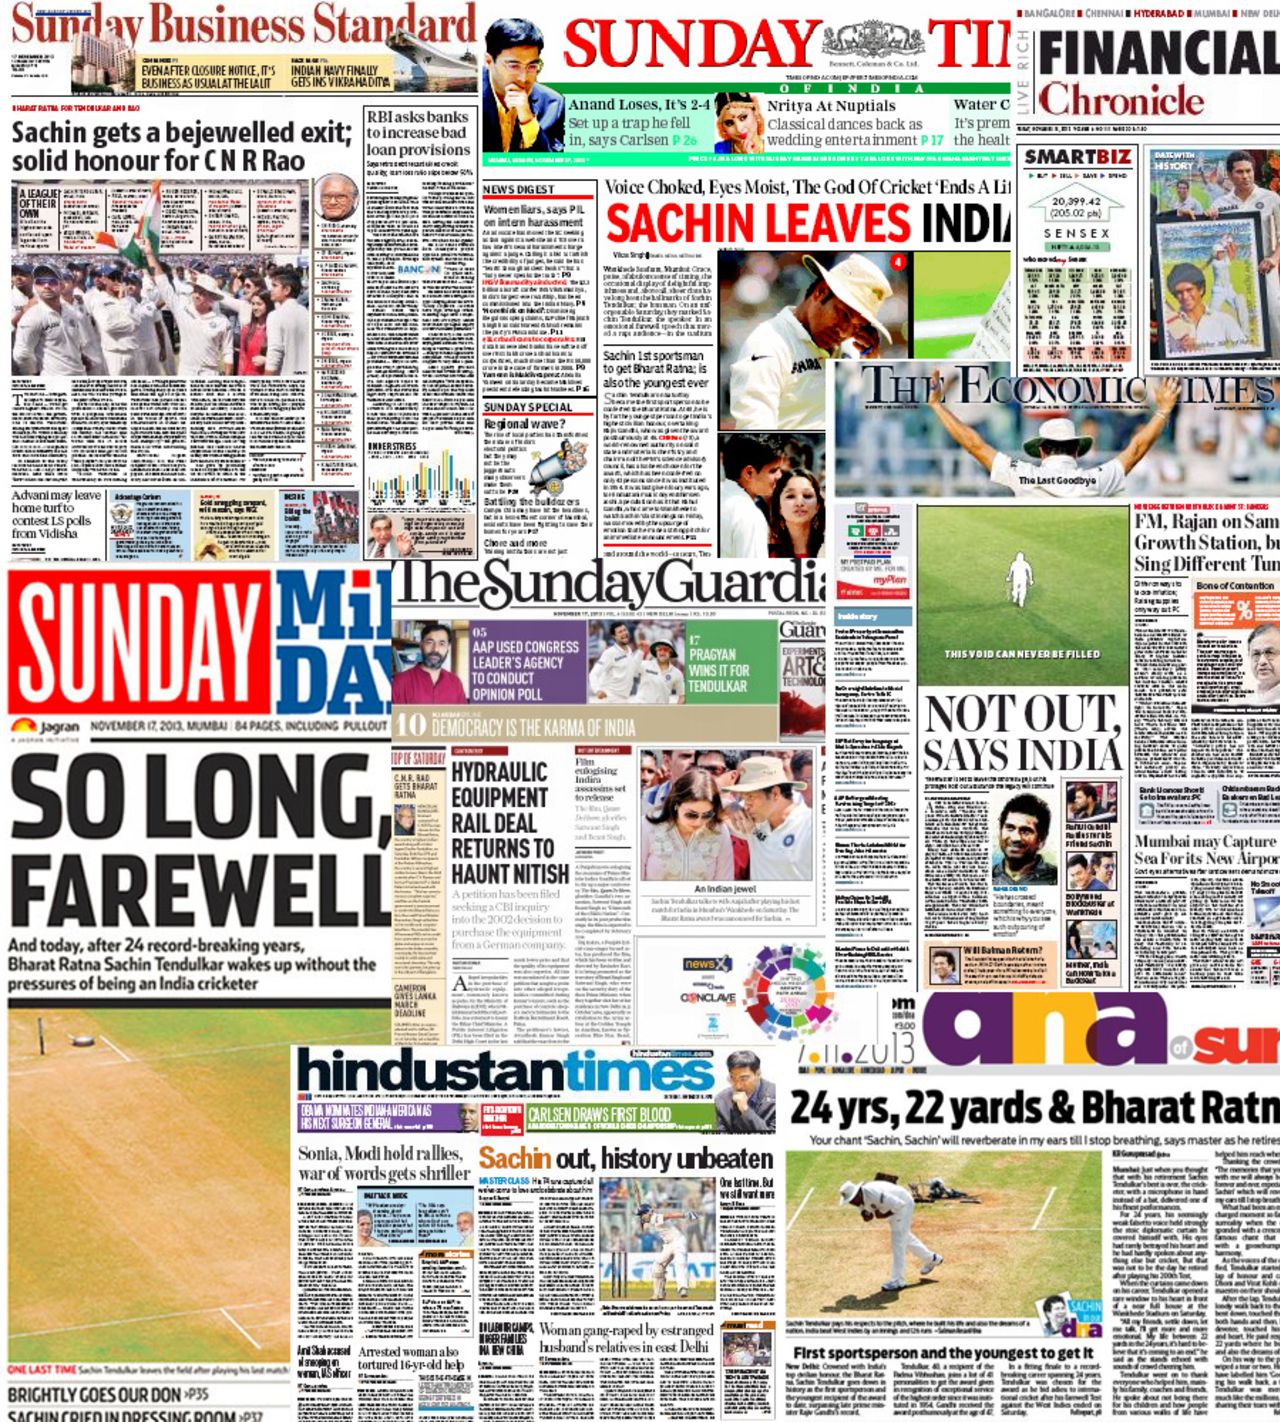 Front pages of Indian newspapers are all about Sachin Tendulkar's retirement